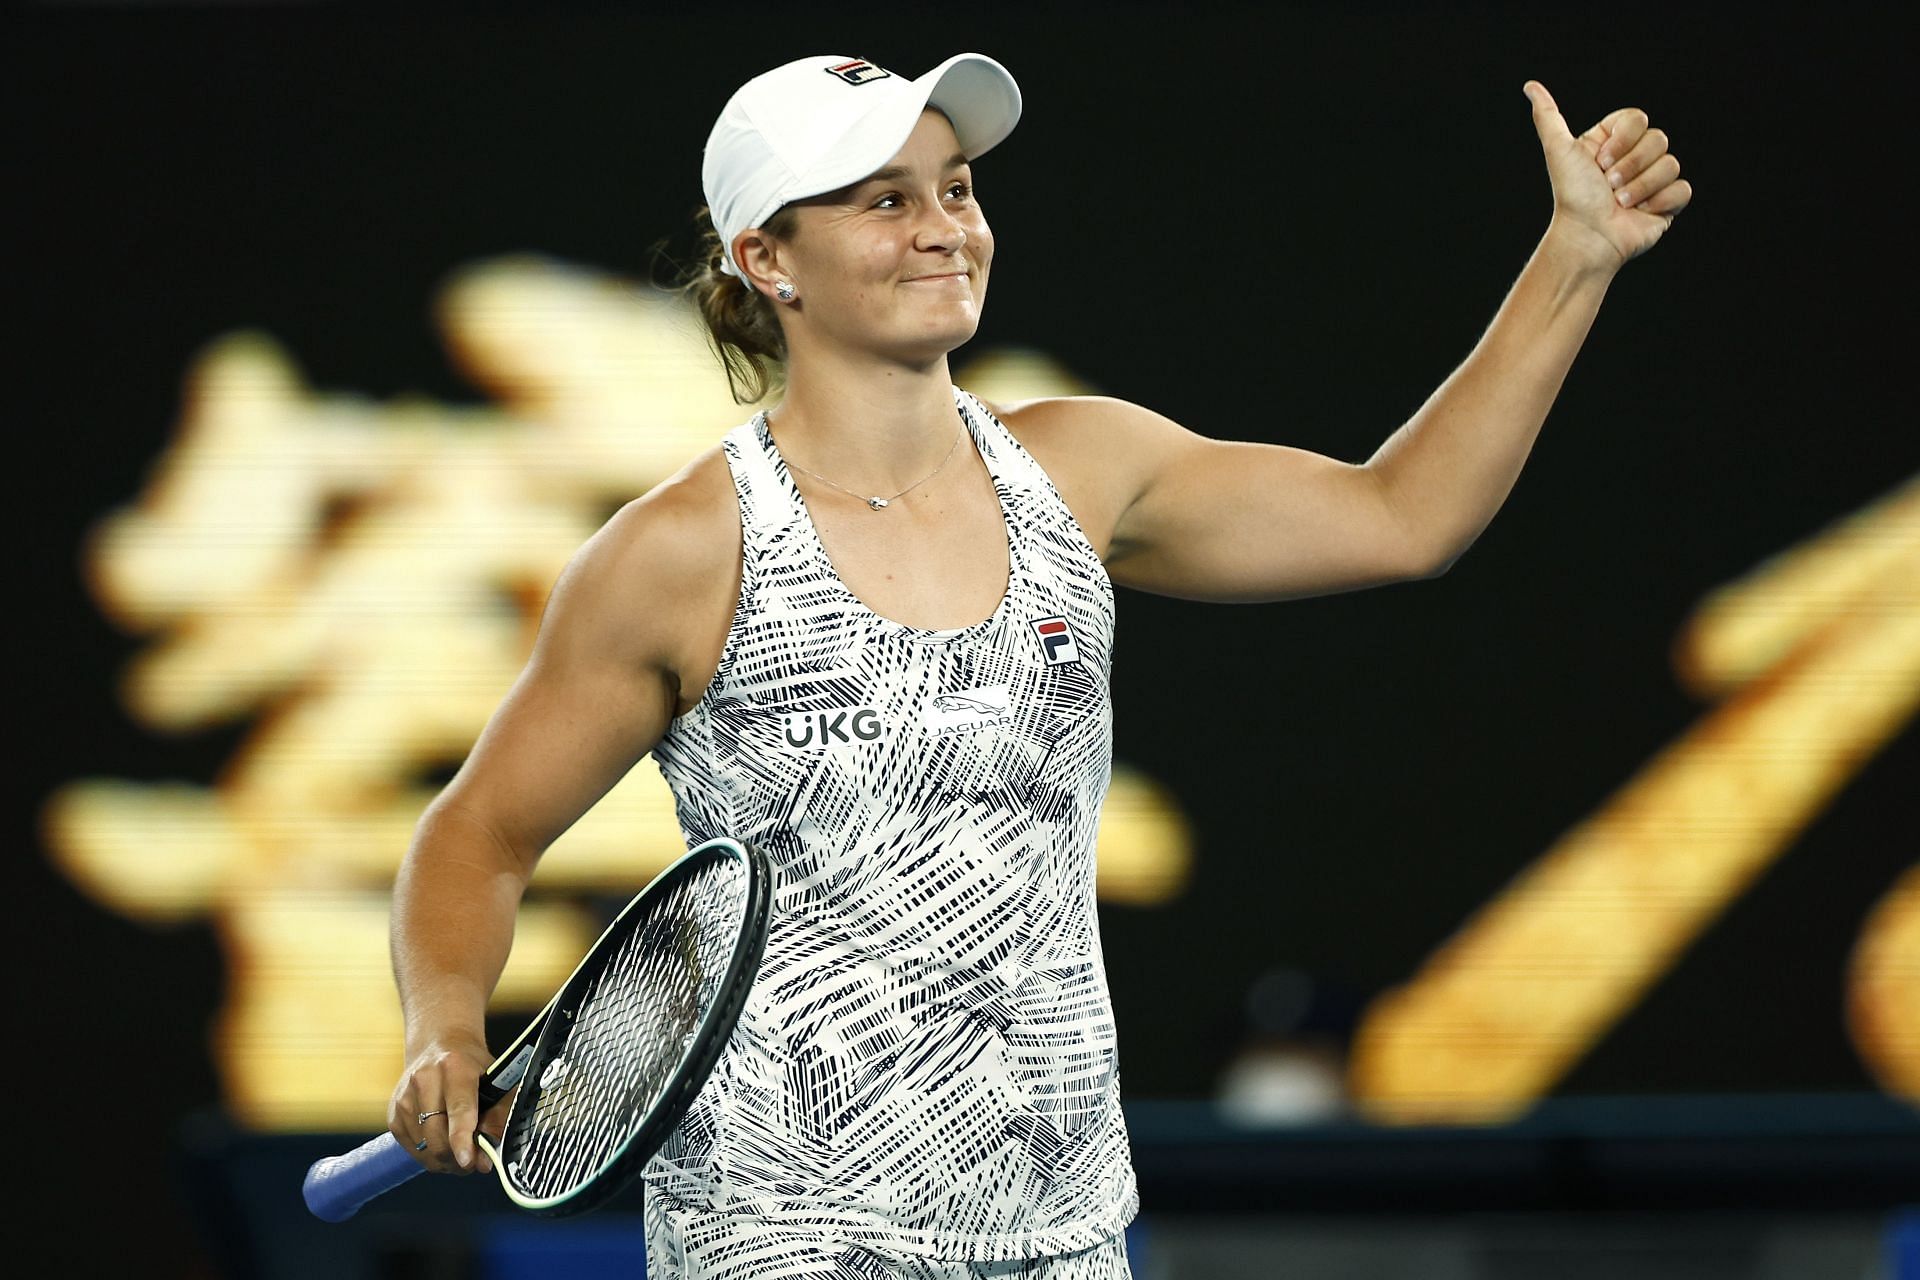 Ashleigh Barty is now the most-watched tennis player at the Australian Open